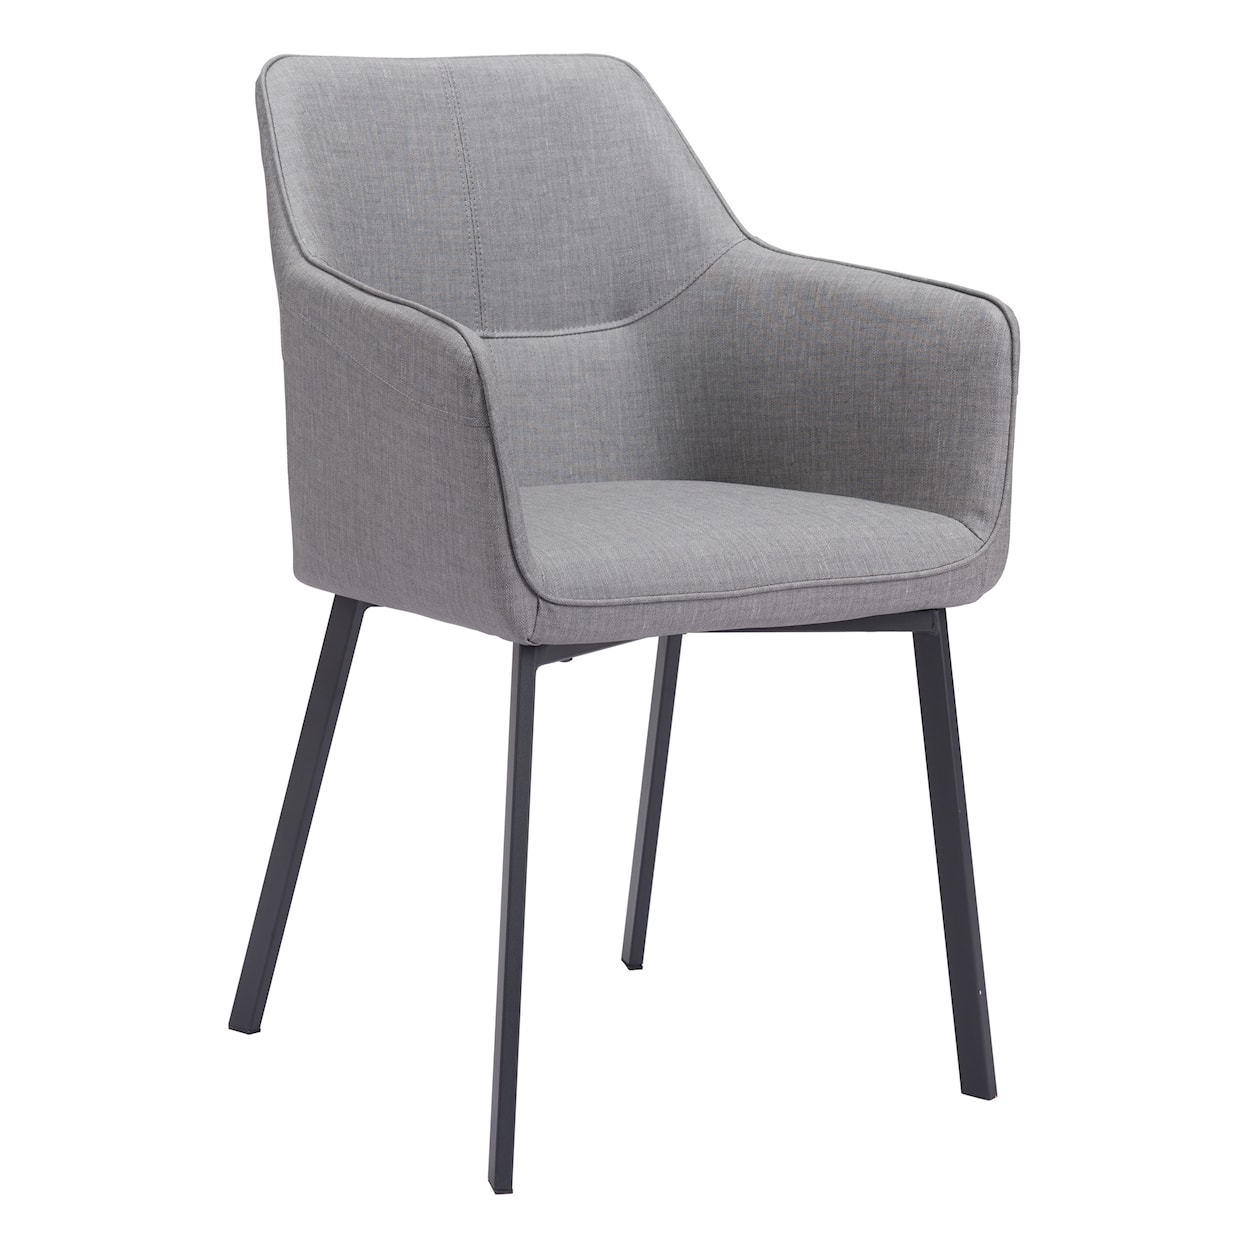 Zuo Adage Dining Chair